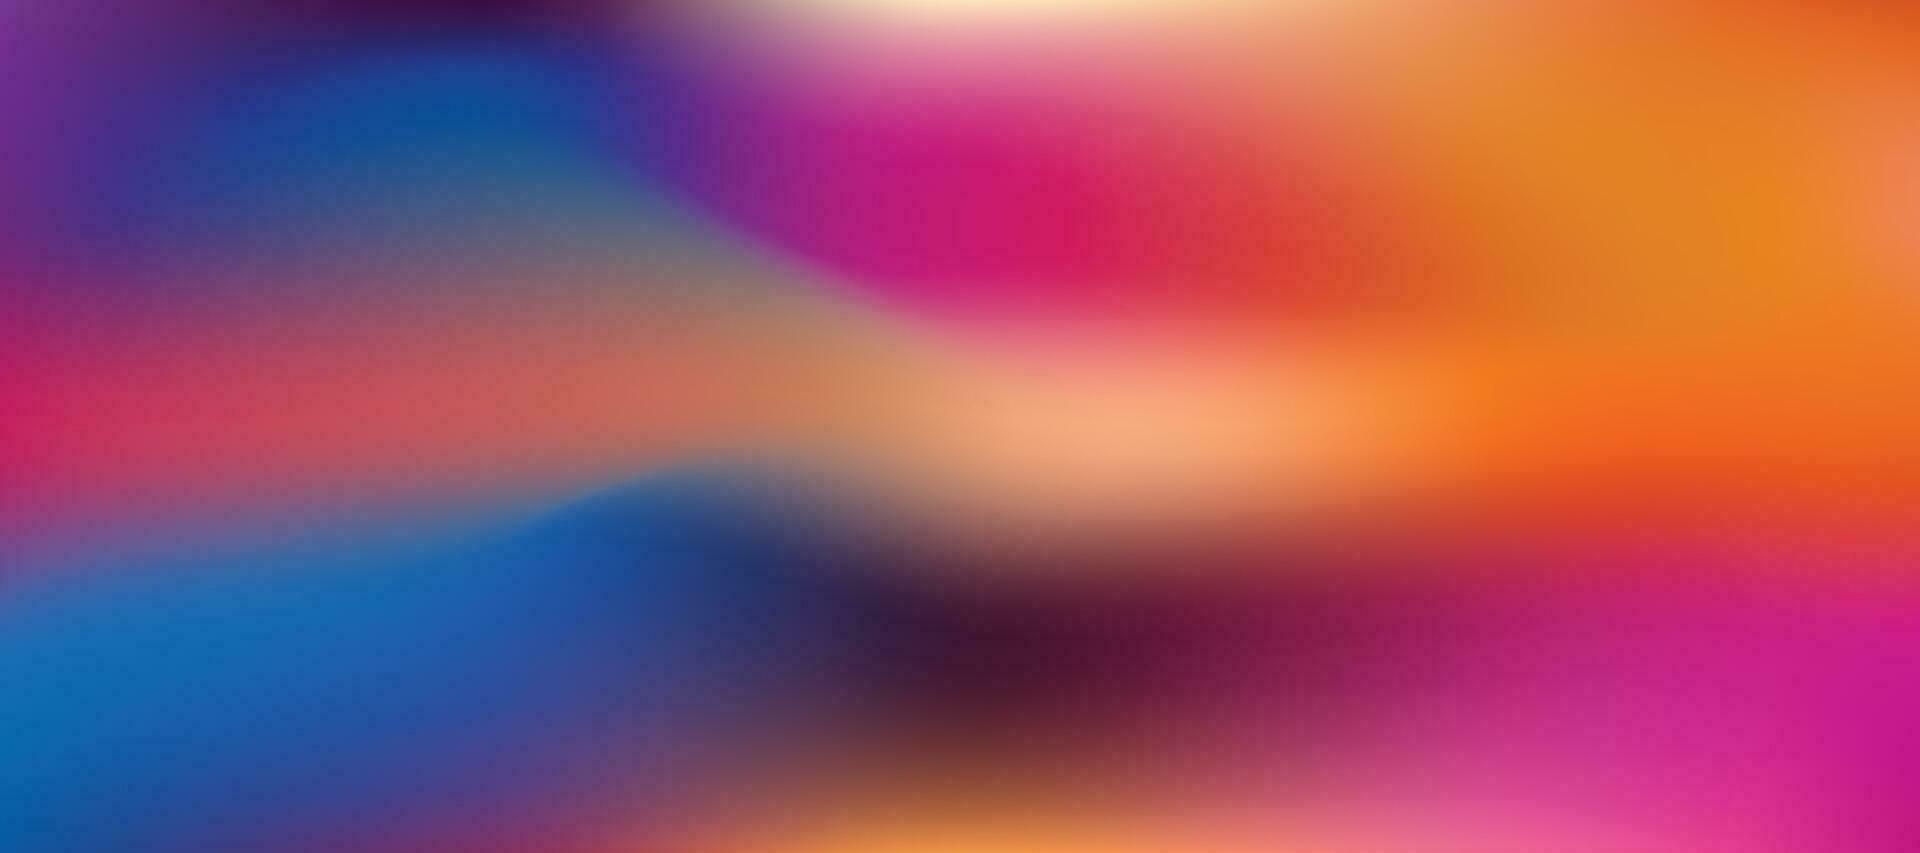 Blurred-colored abstract background. Smooth transitions of iridescent colors. vector